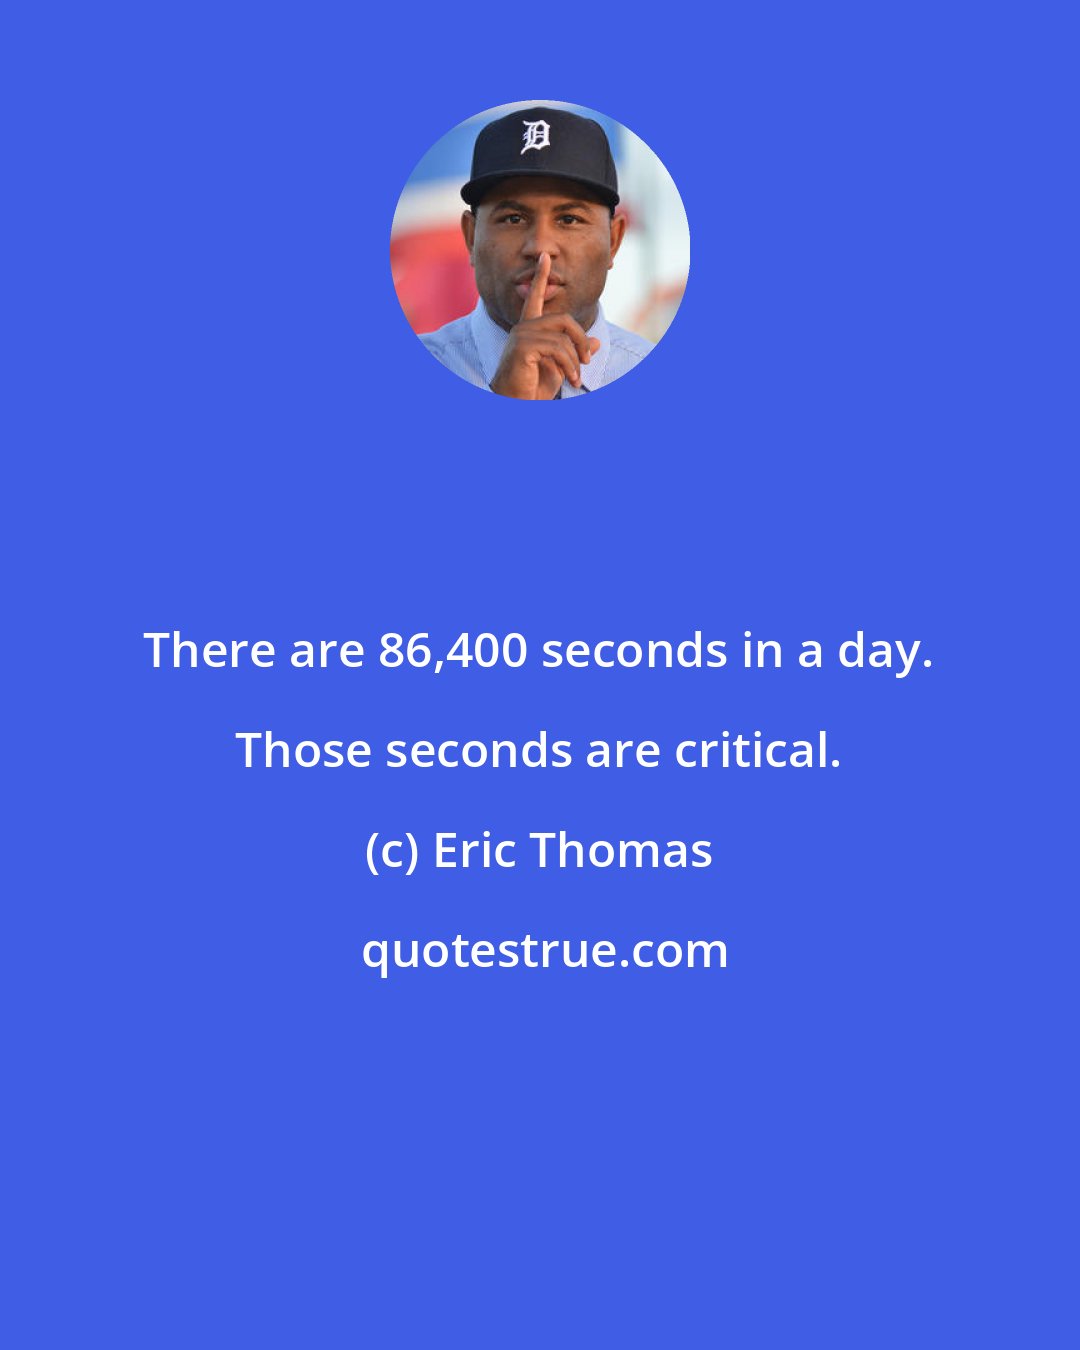 Eric Thomas: There are 86,400 seconds in a day. Those seconds are critical.